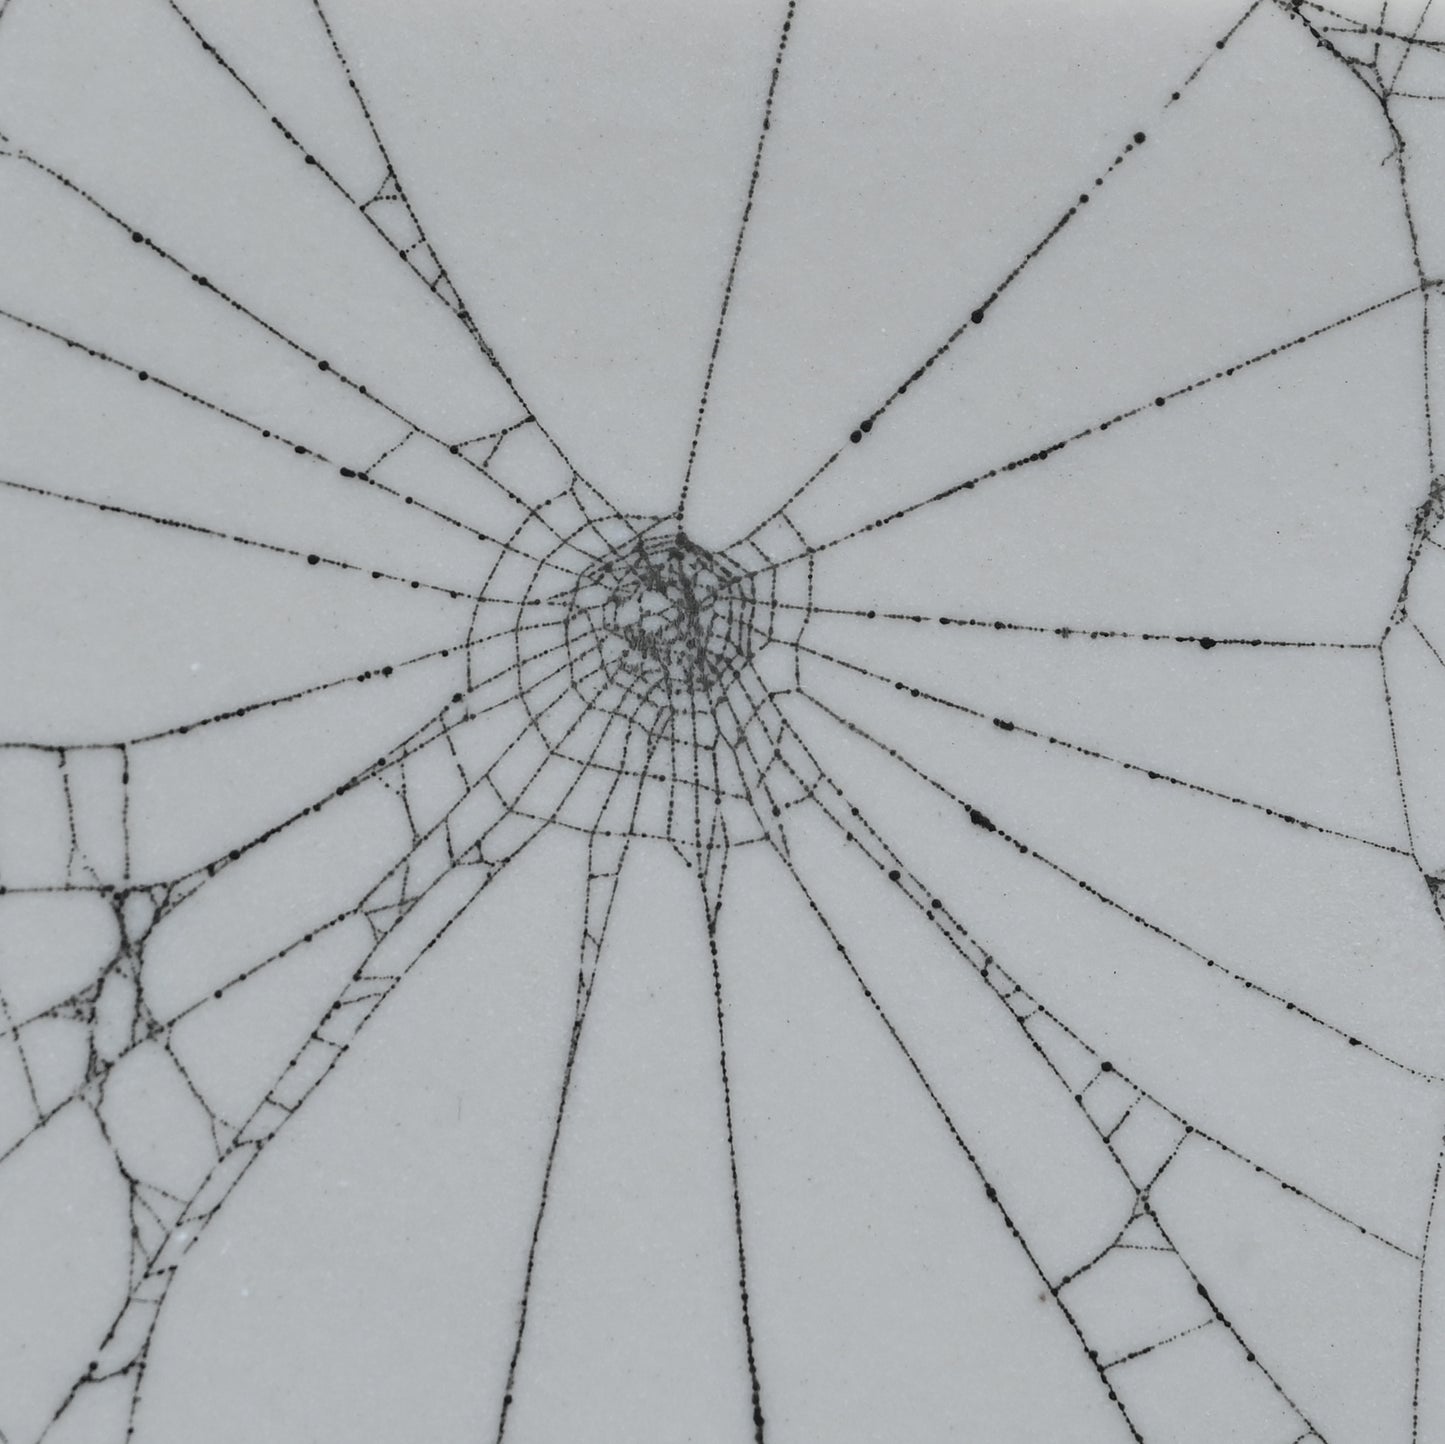 Web on Clay (147), Collected August 19, 2022